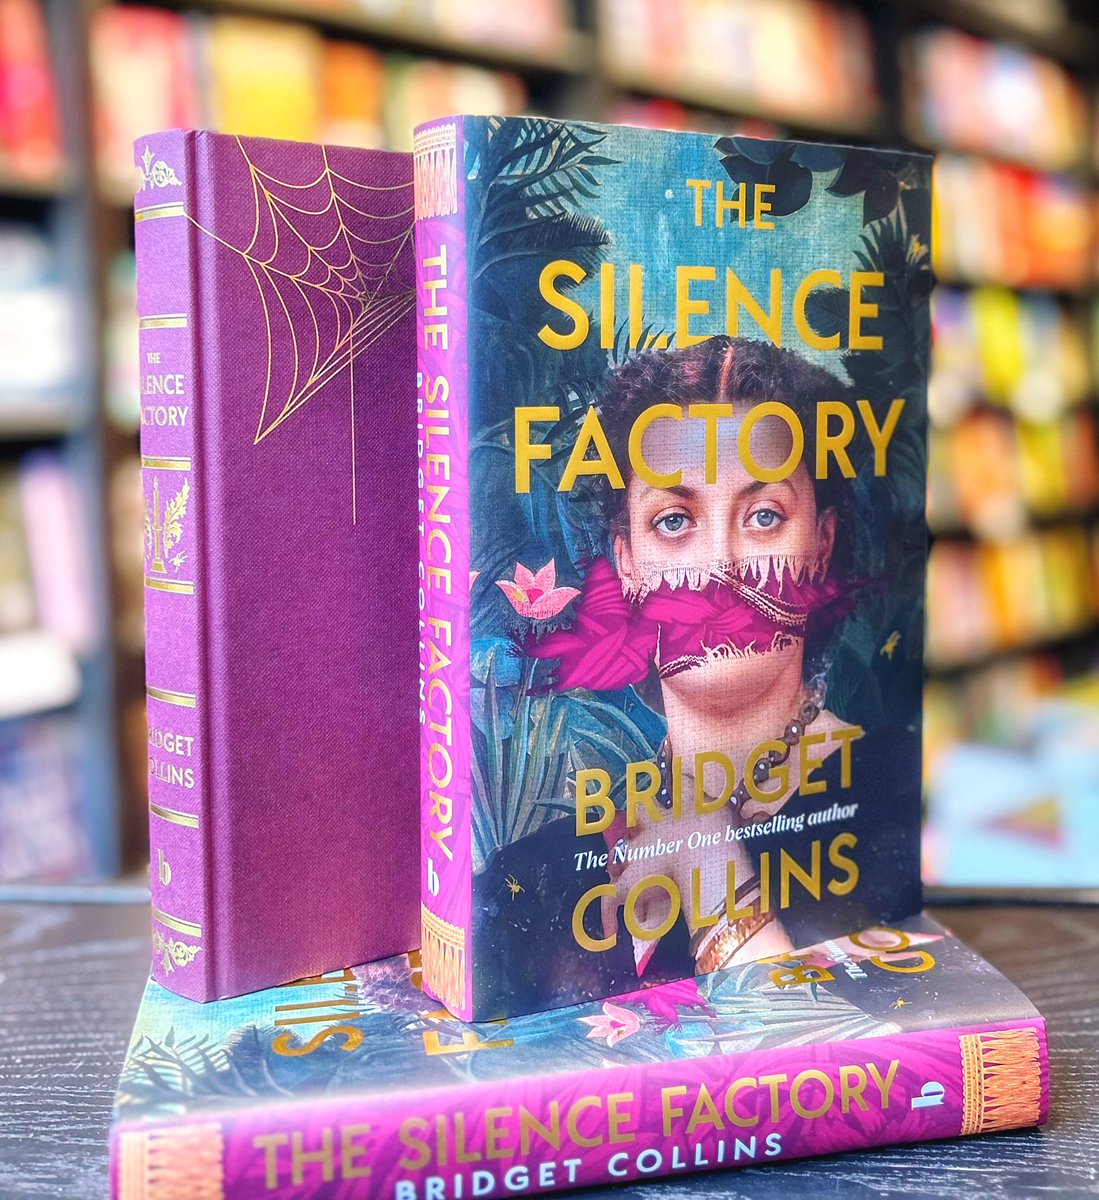 A deliciously dark gothic journey into obsession, secrets, and magic, in this father’s search for silence, and a cure for his young daughter’s deafness.